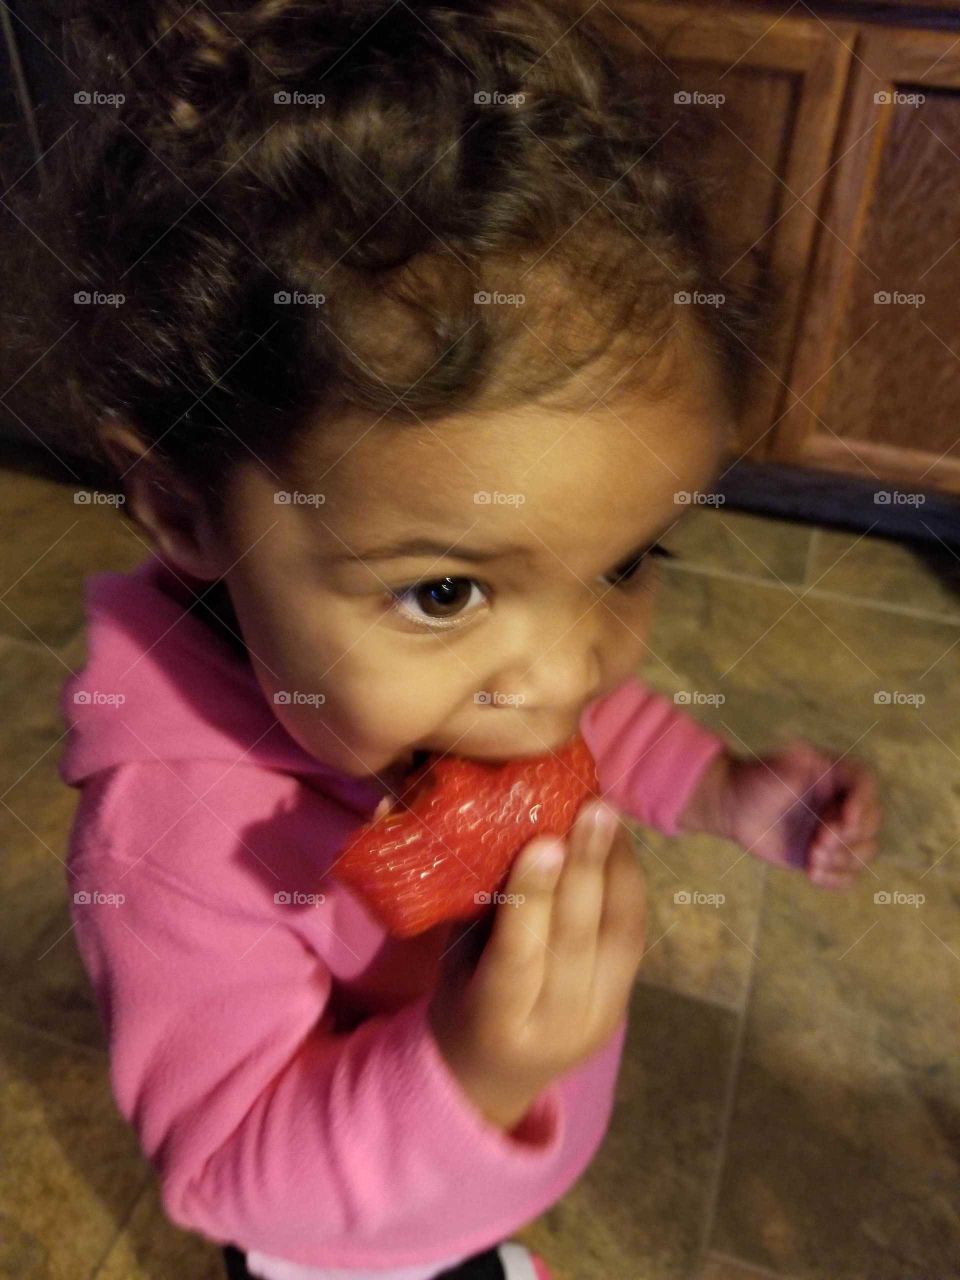 wide open eyes as she got handed a huge strawberry to eat instead of cut up pieces, delighted eyes dance with excitement, strawberries are the best